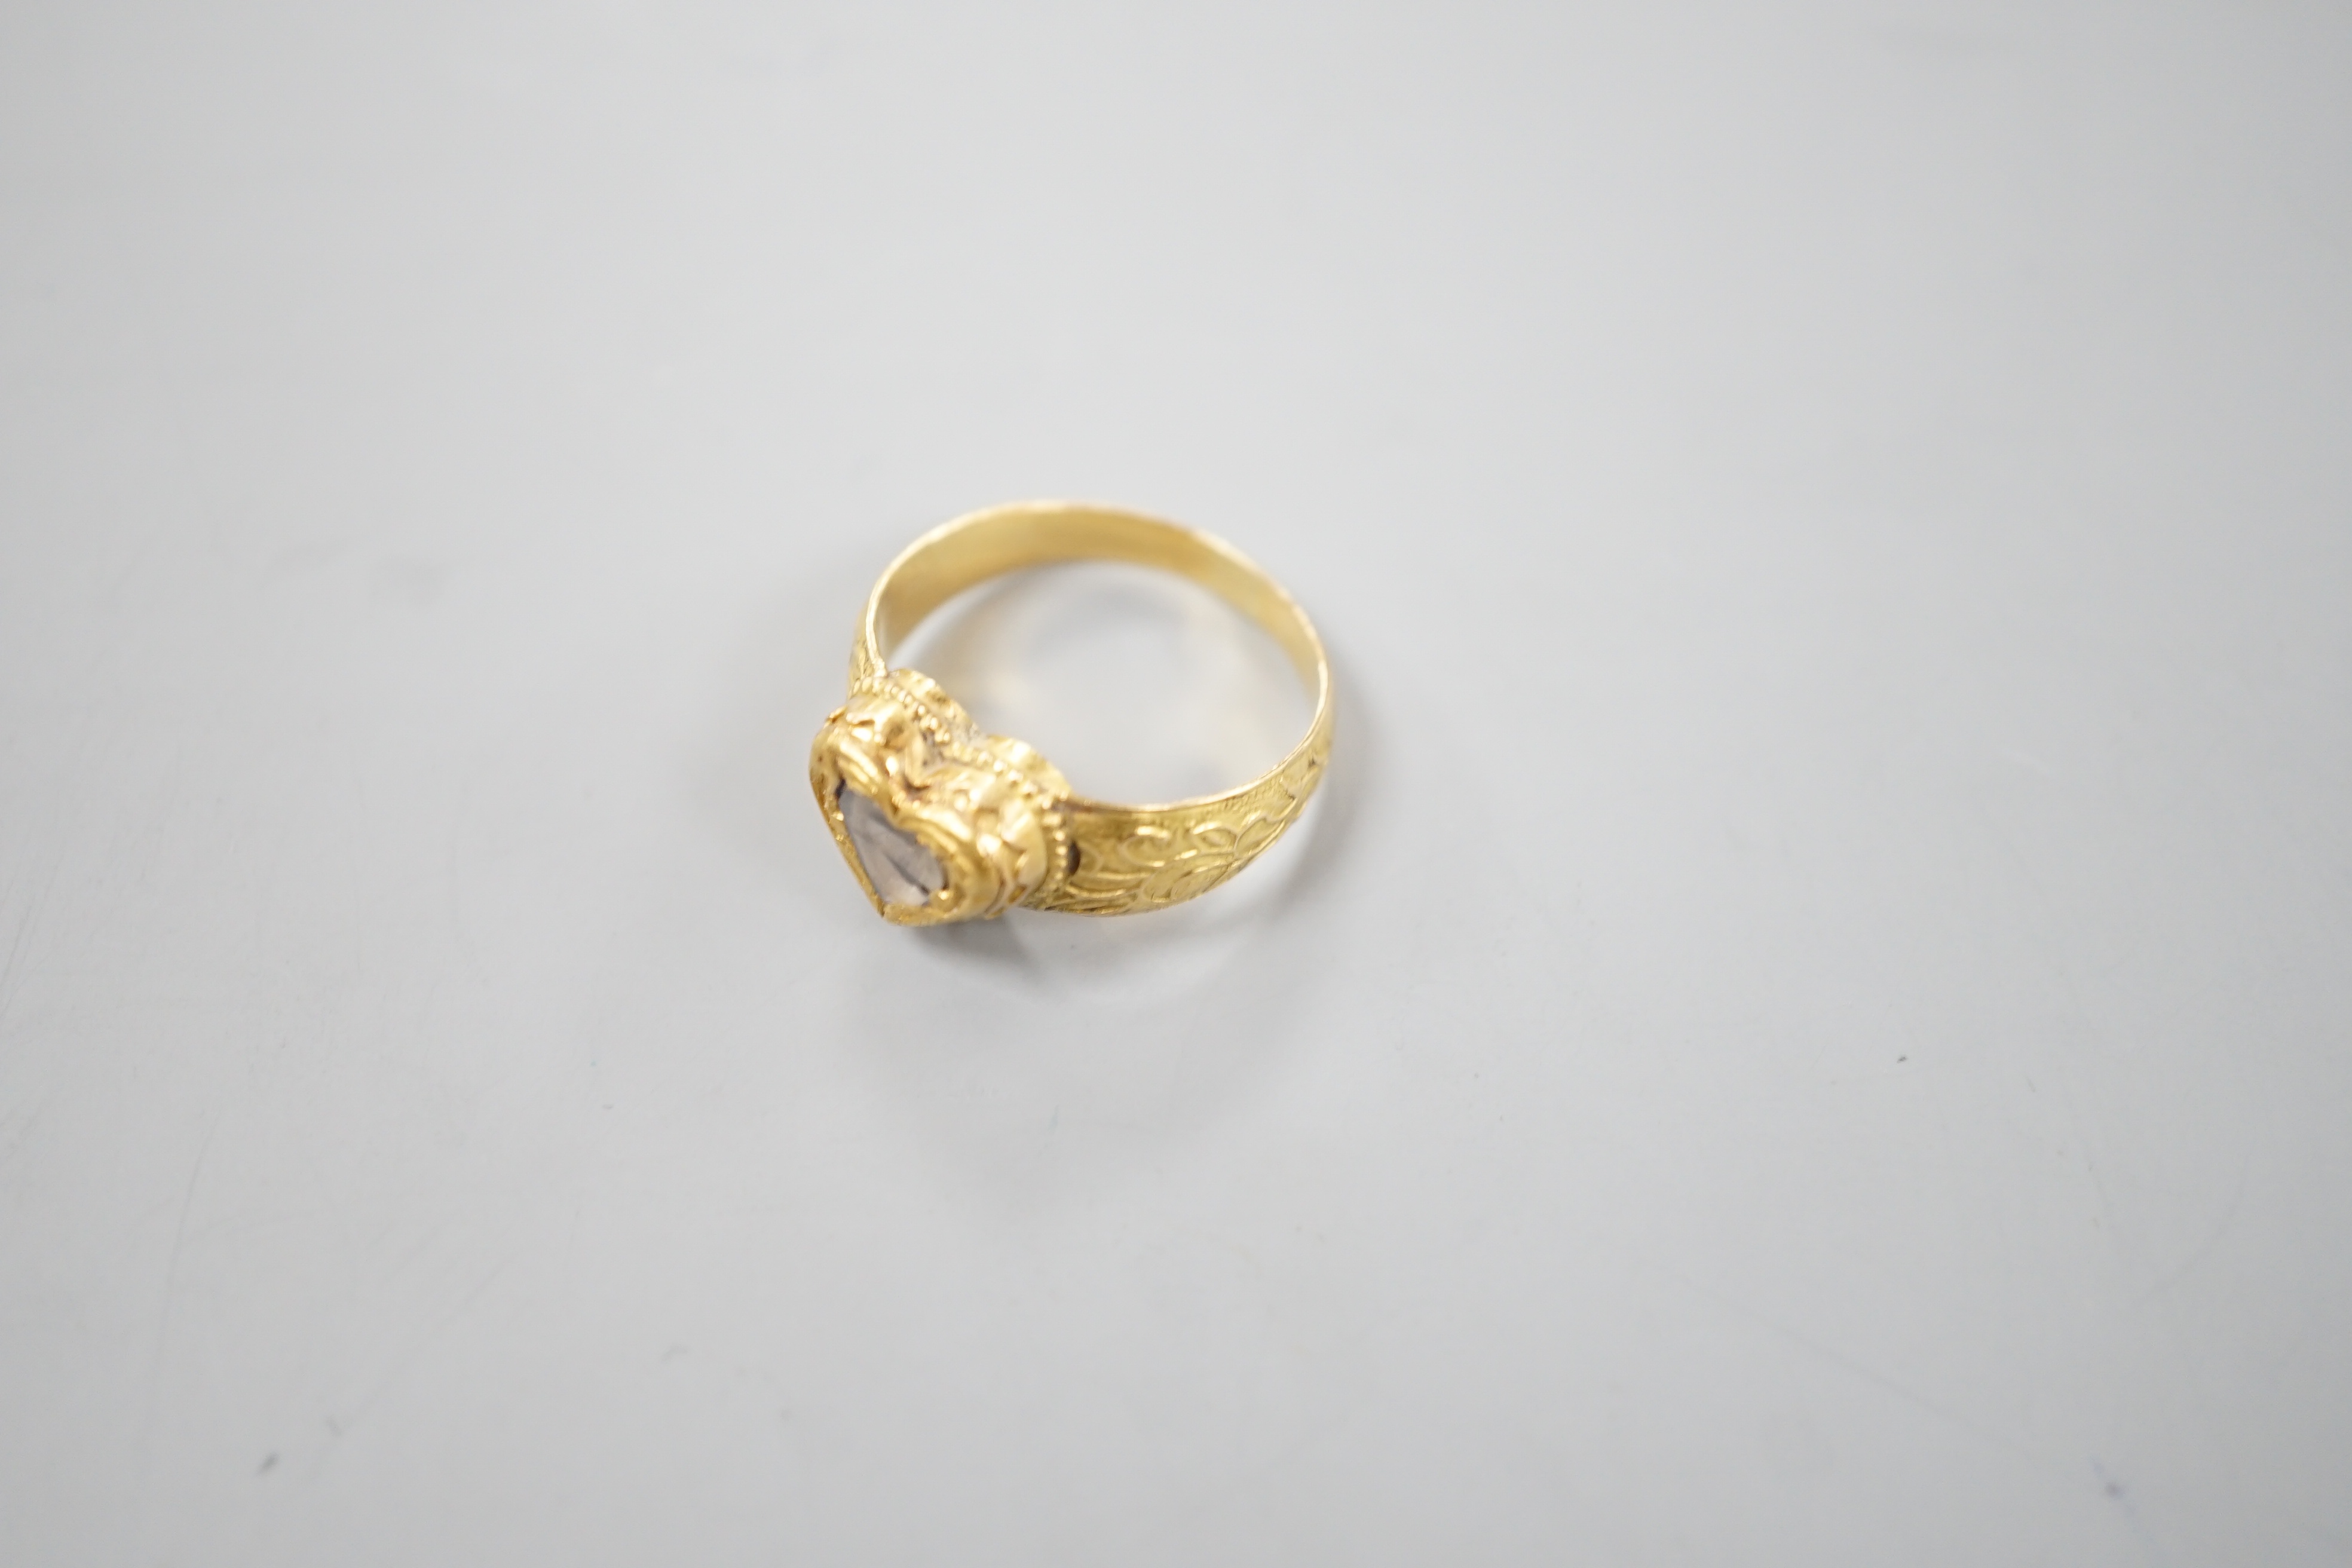 An Indian yellow metal and heart shaped diamond set ring, with engraved shank, size O, gross weight 6.2 grams, (crack to stone).